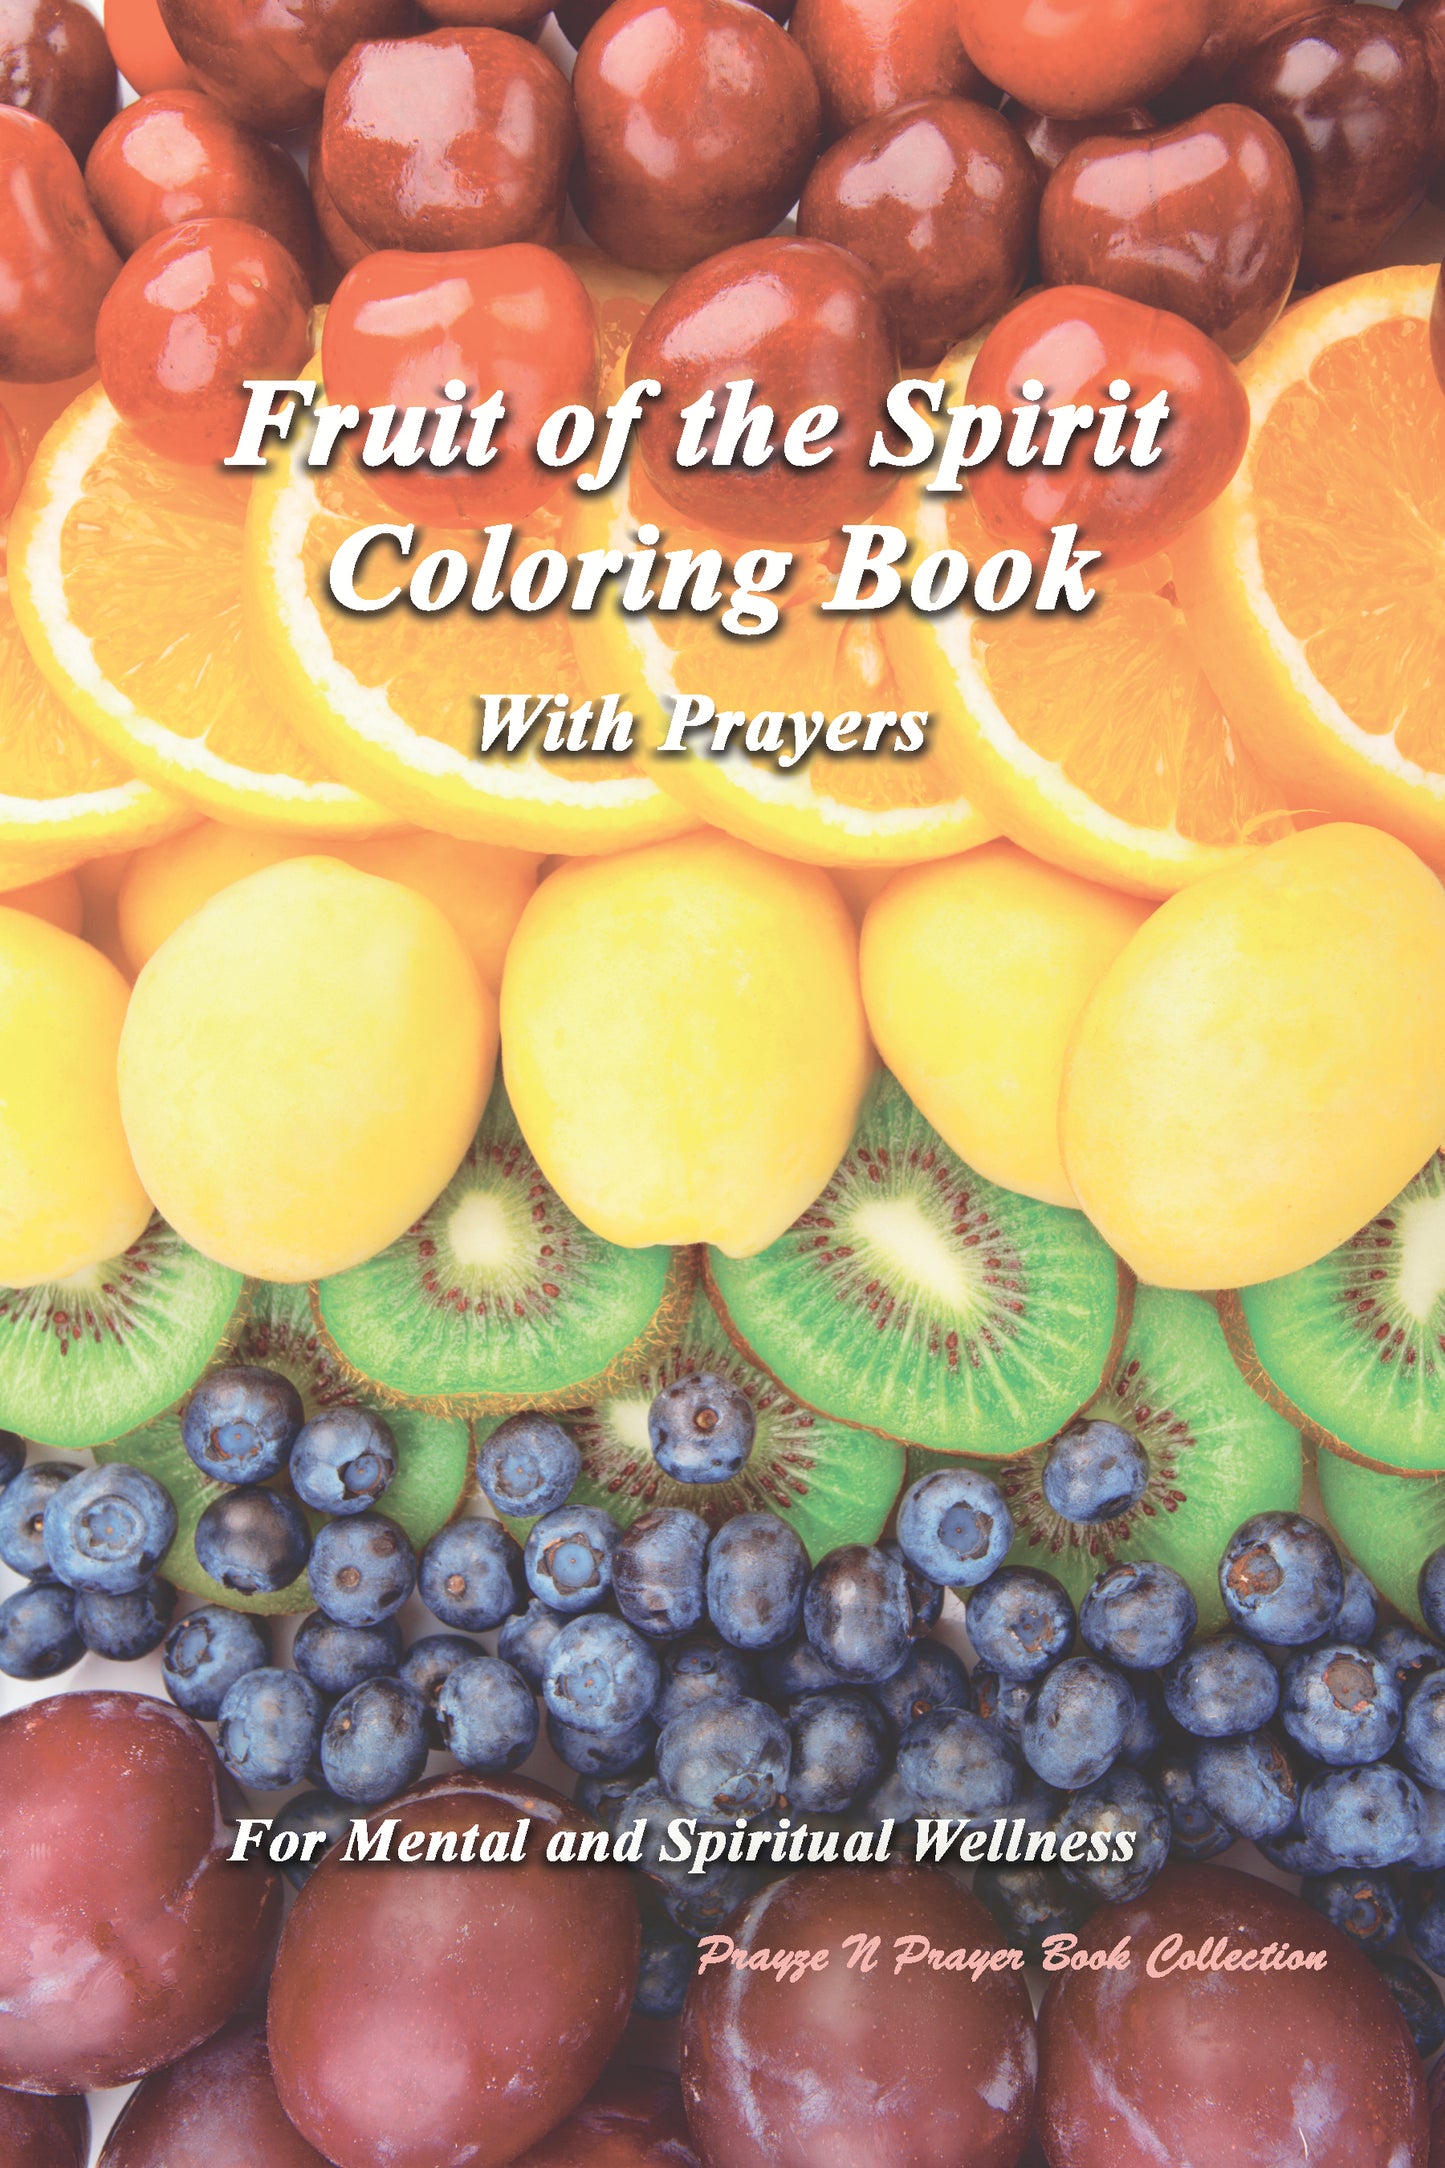 Fruit of the Spirit Coloring Book